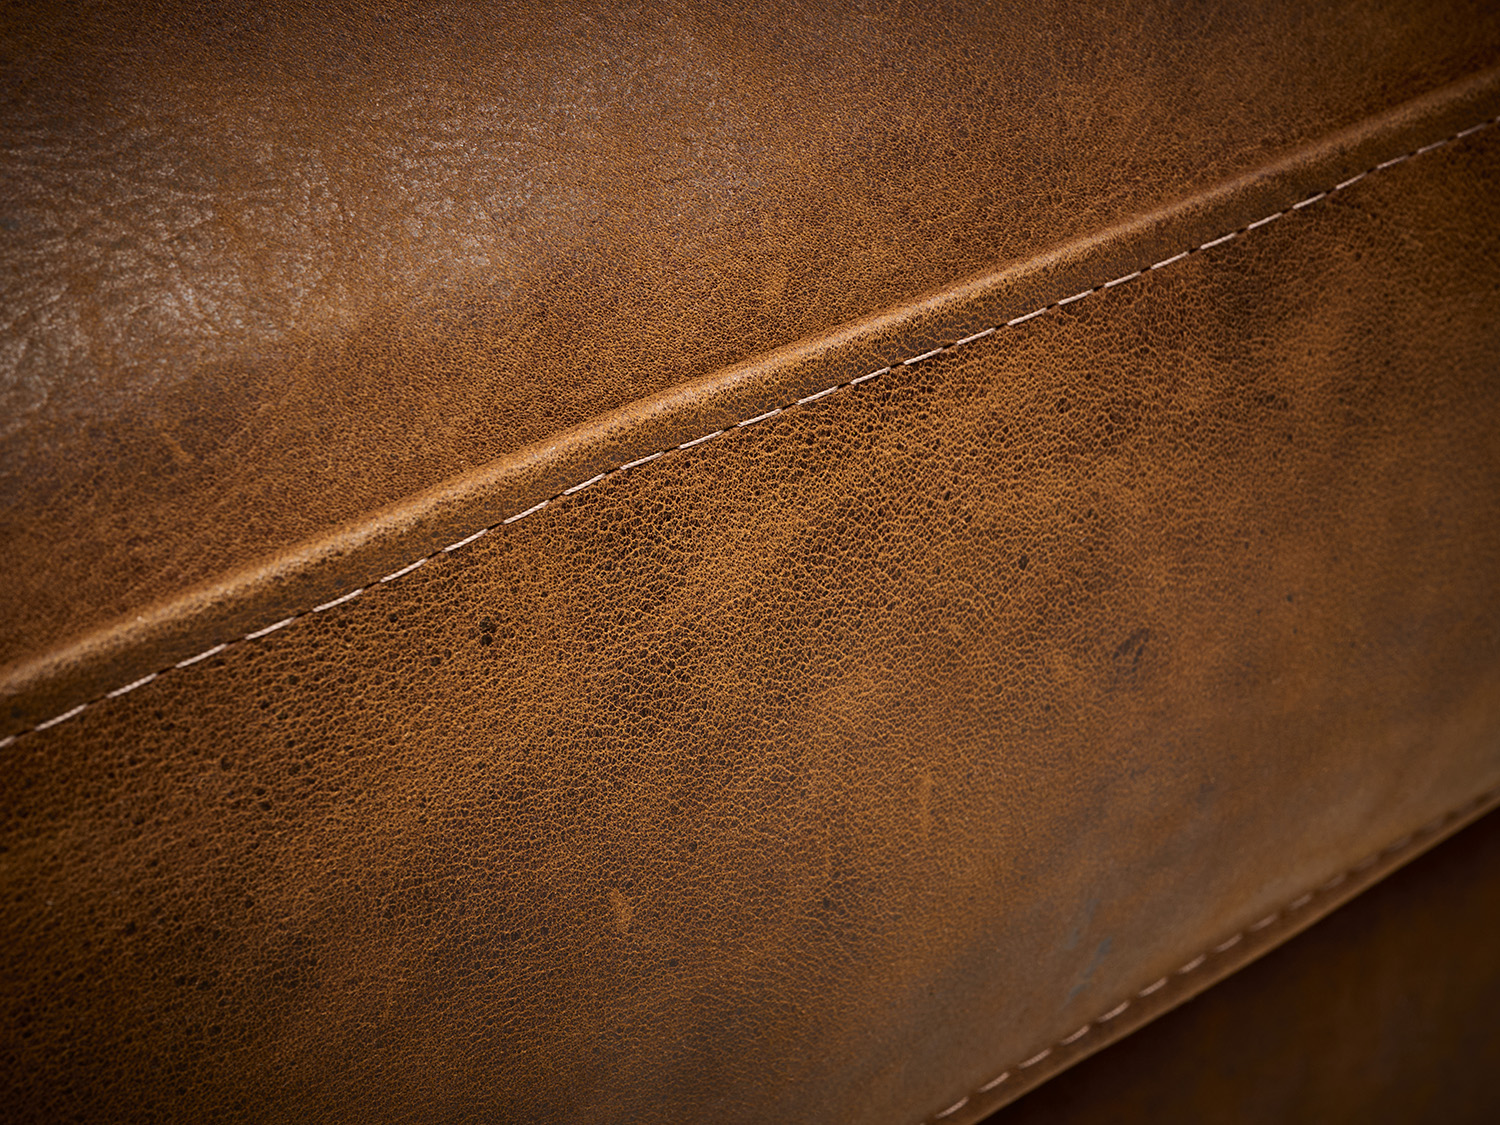 In stock Bruno Chair in Burnham Sycamore Full Aniline Nubuck Leather - detail 1